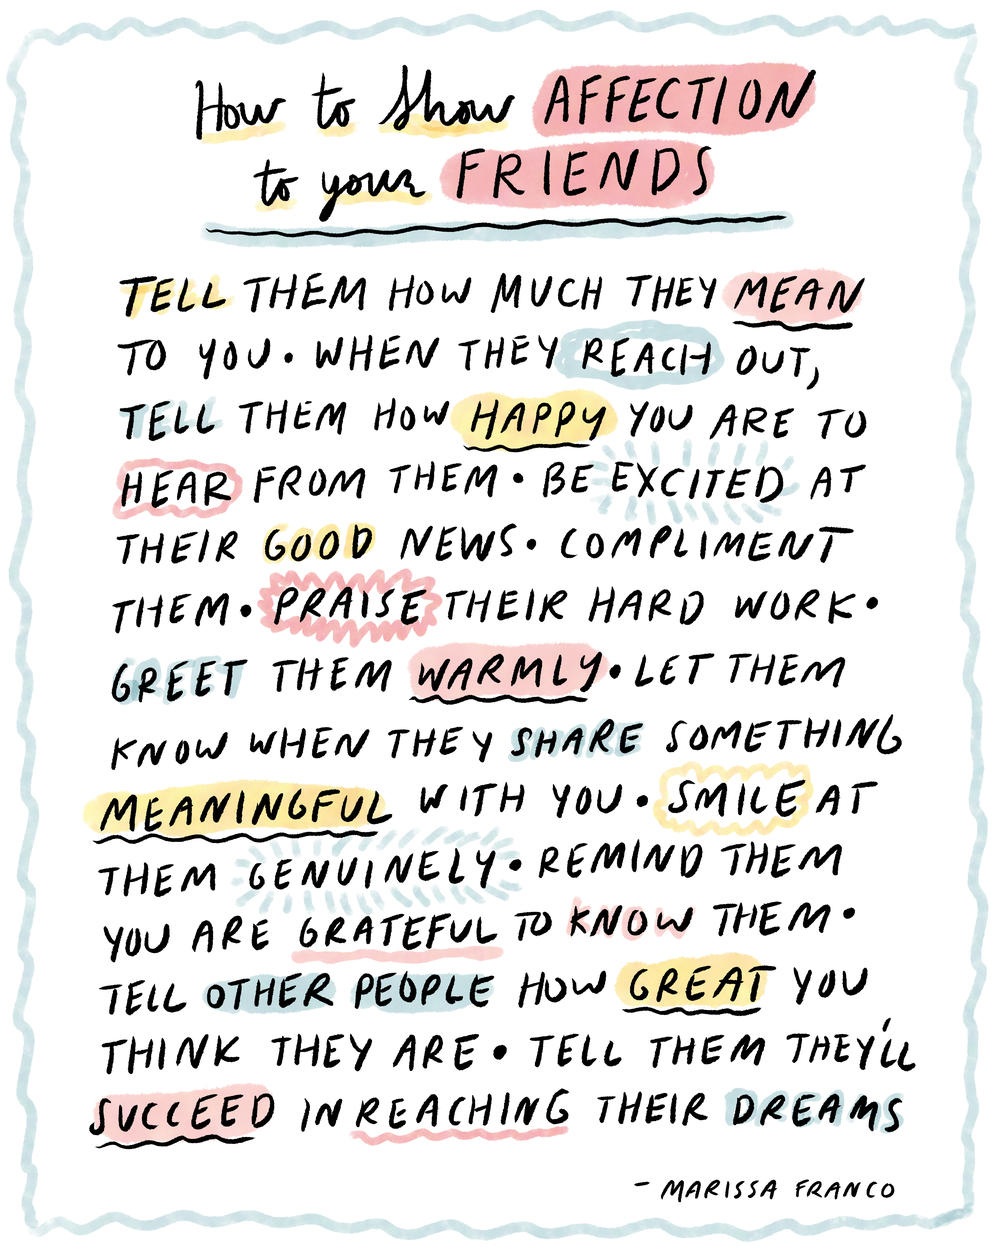 5 easy tips for making friends as an adult : Life Kit : NPR